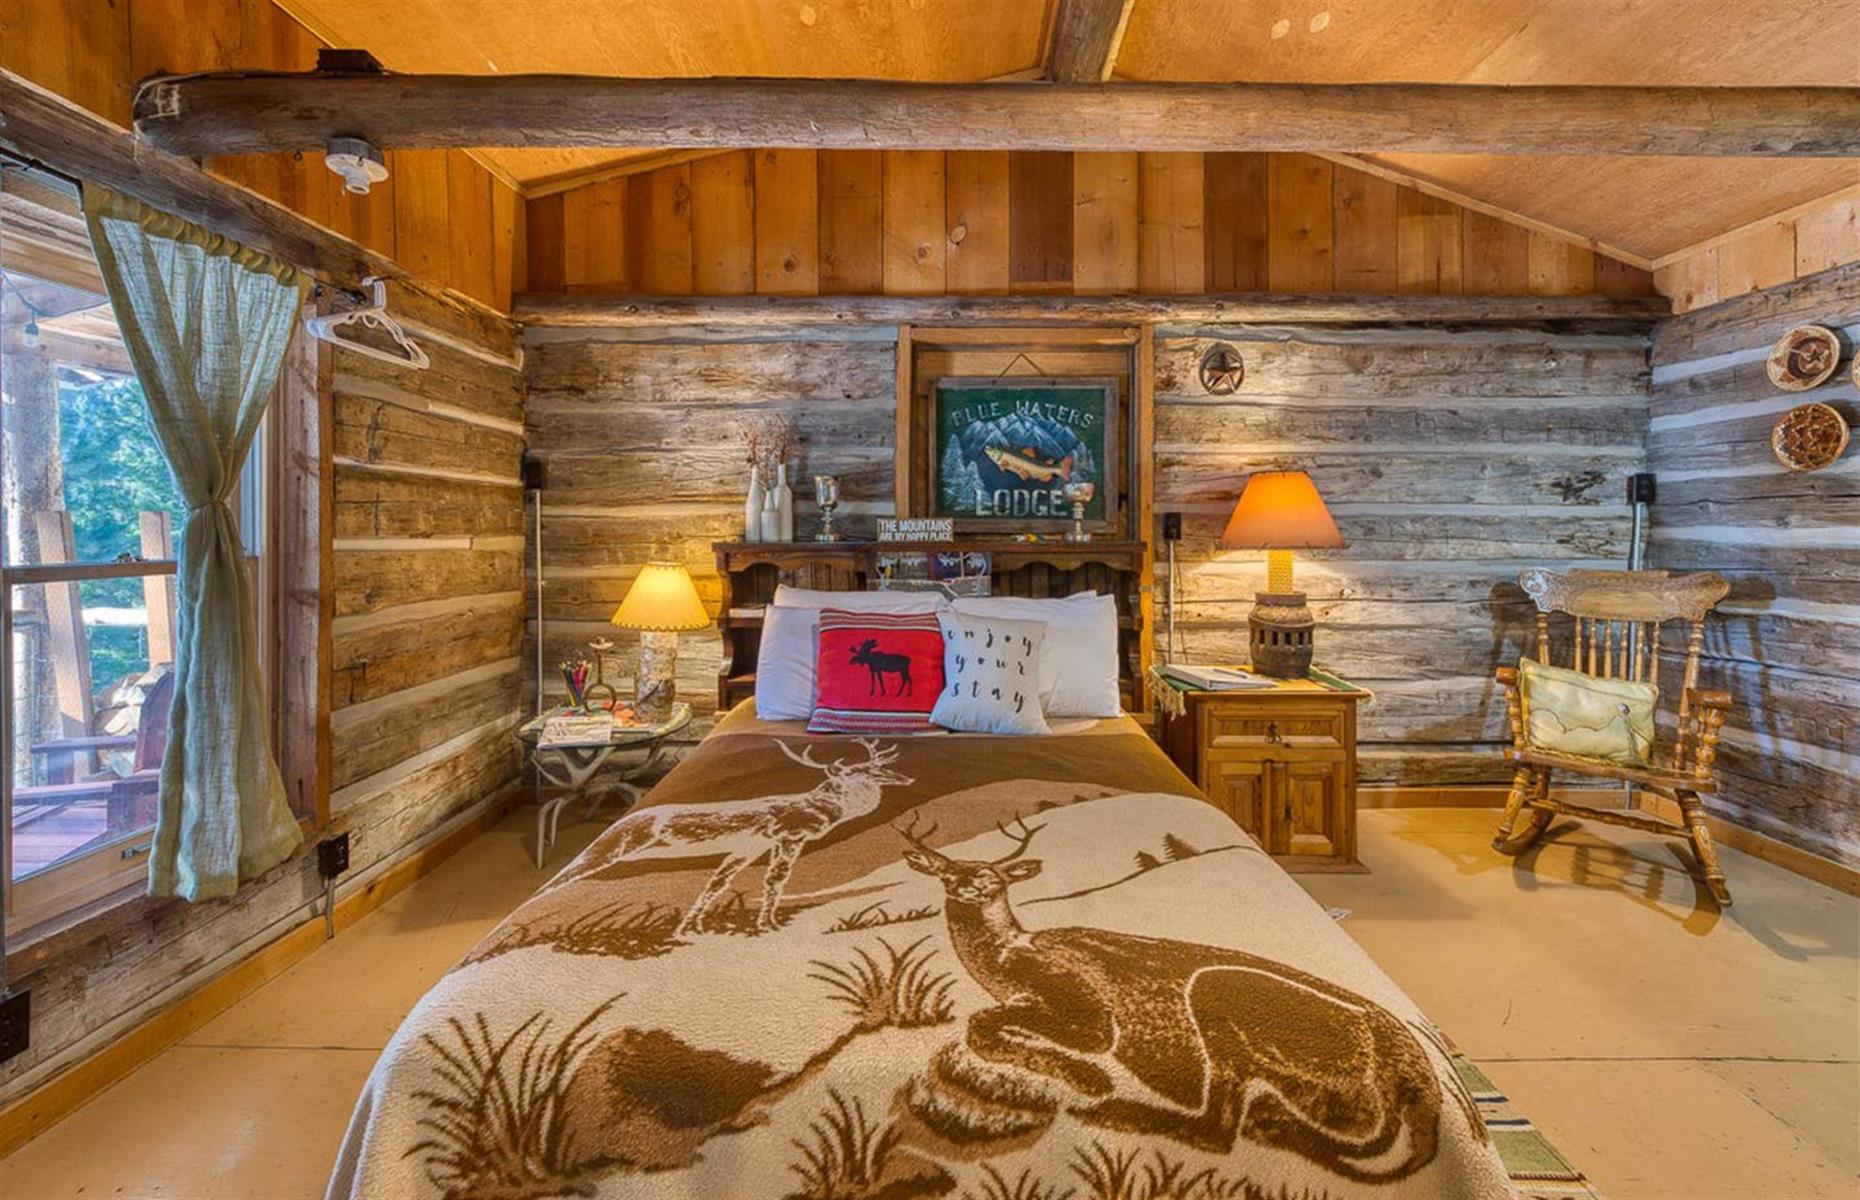 <p>Tipping itself as "the ultimate destination for social distancing", this <a href="https://www.airbnb.co.uk/rooms/8582482">remote one-room cabin</a> in Darby is perfect for enjoying the great outdoors in Big Sky Country. Oozing rustic charm, the cabin has a wood-burning fireplace and a private deck with seating. It's available for $82 a night and it sits on 10 acres of forested land, meaning there's ample opportunity for outdoor activities like hiking, biking and fishing too. You can find our pick of other <a href="https://www.loveexploring.com/gallerylist/98871/americas-best-remote-airbnbs-to-escape-to">fabulous and remote Airbnbs in America</a> too. </p>